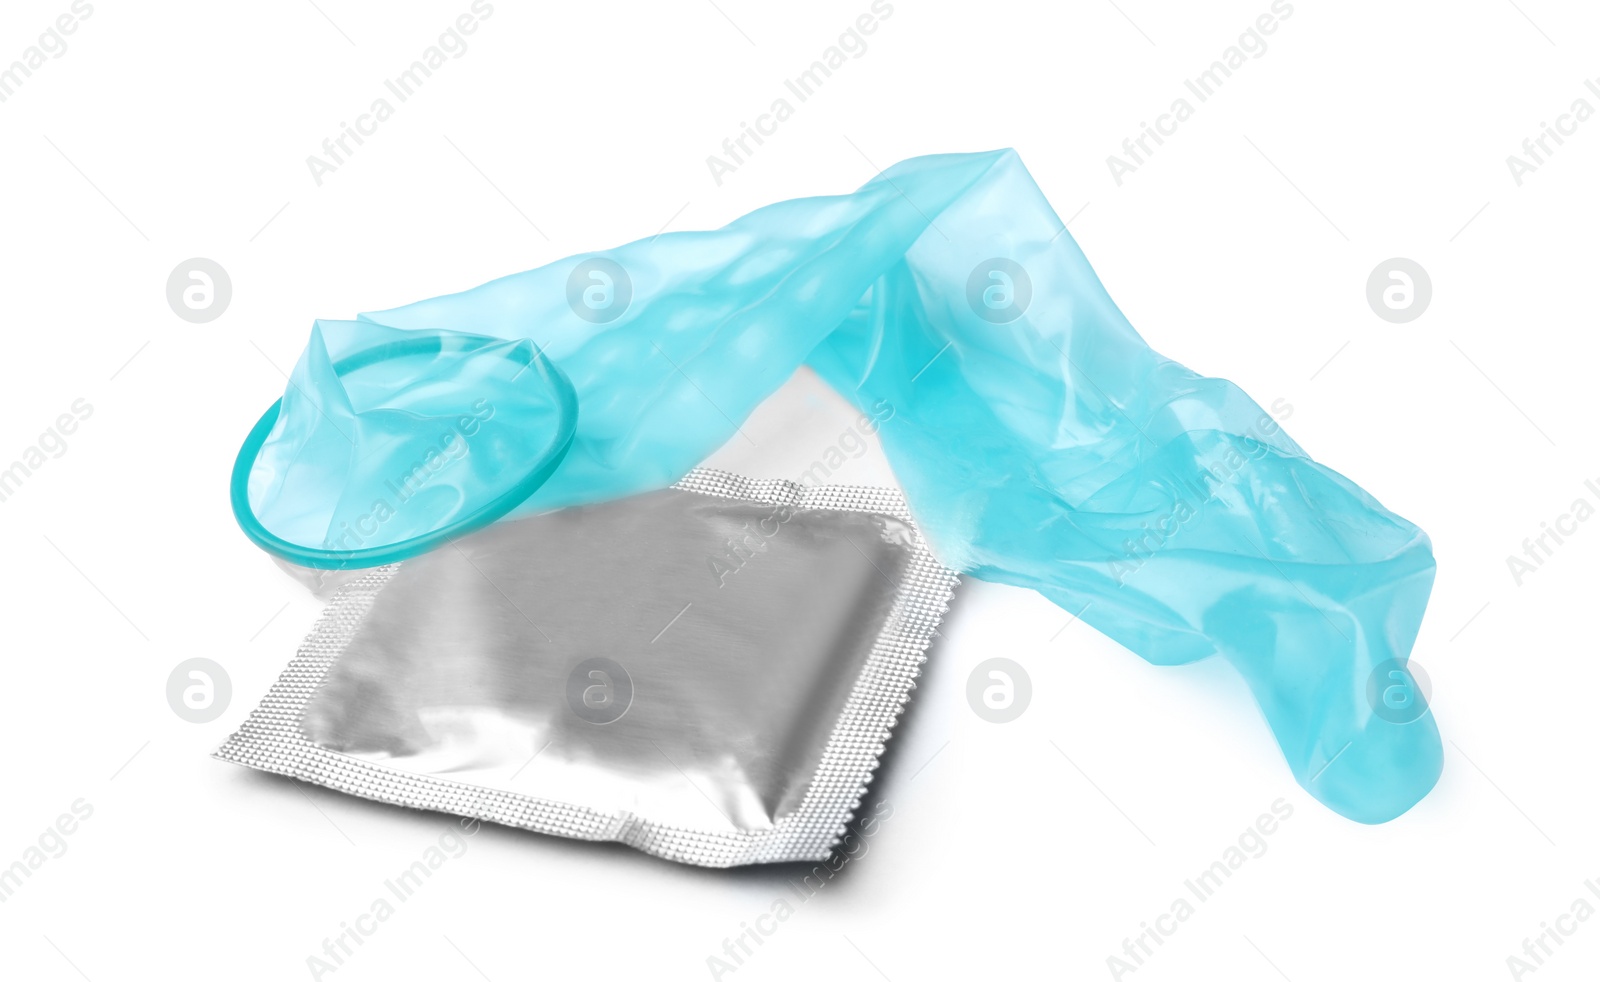 Image of Unrolled light blue condom and package on white background. Safe sex